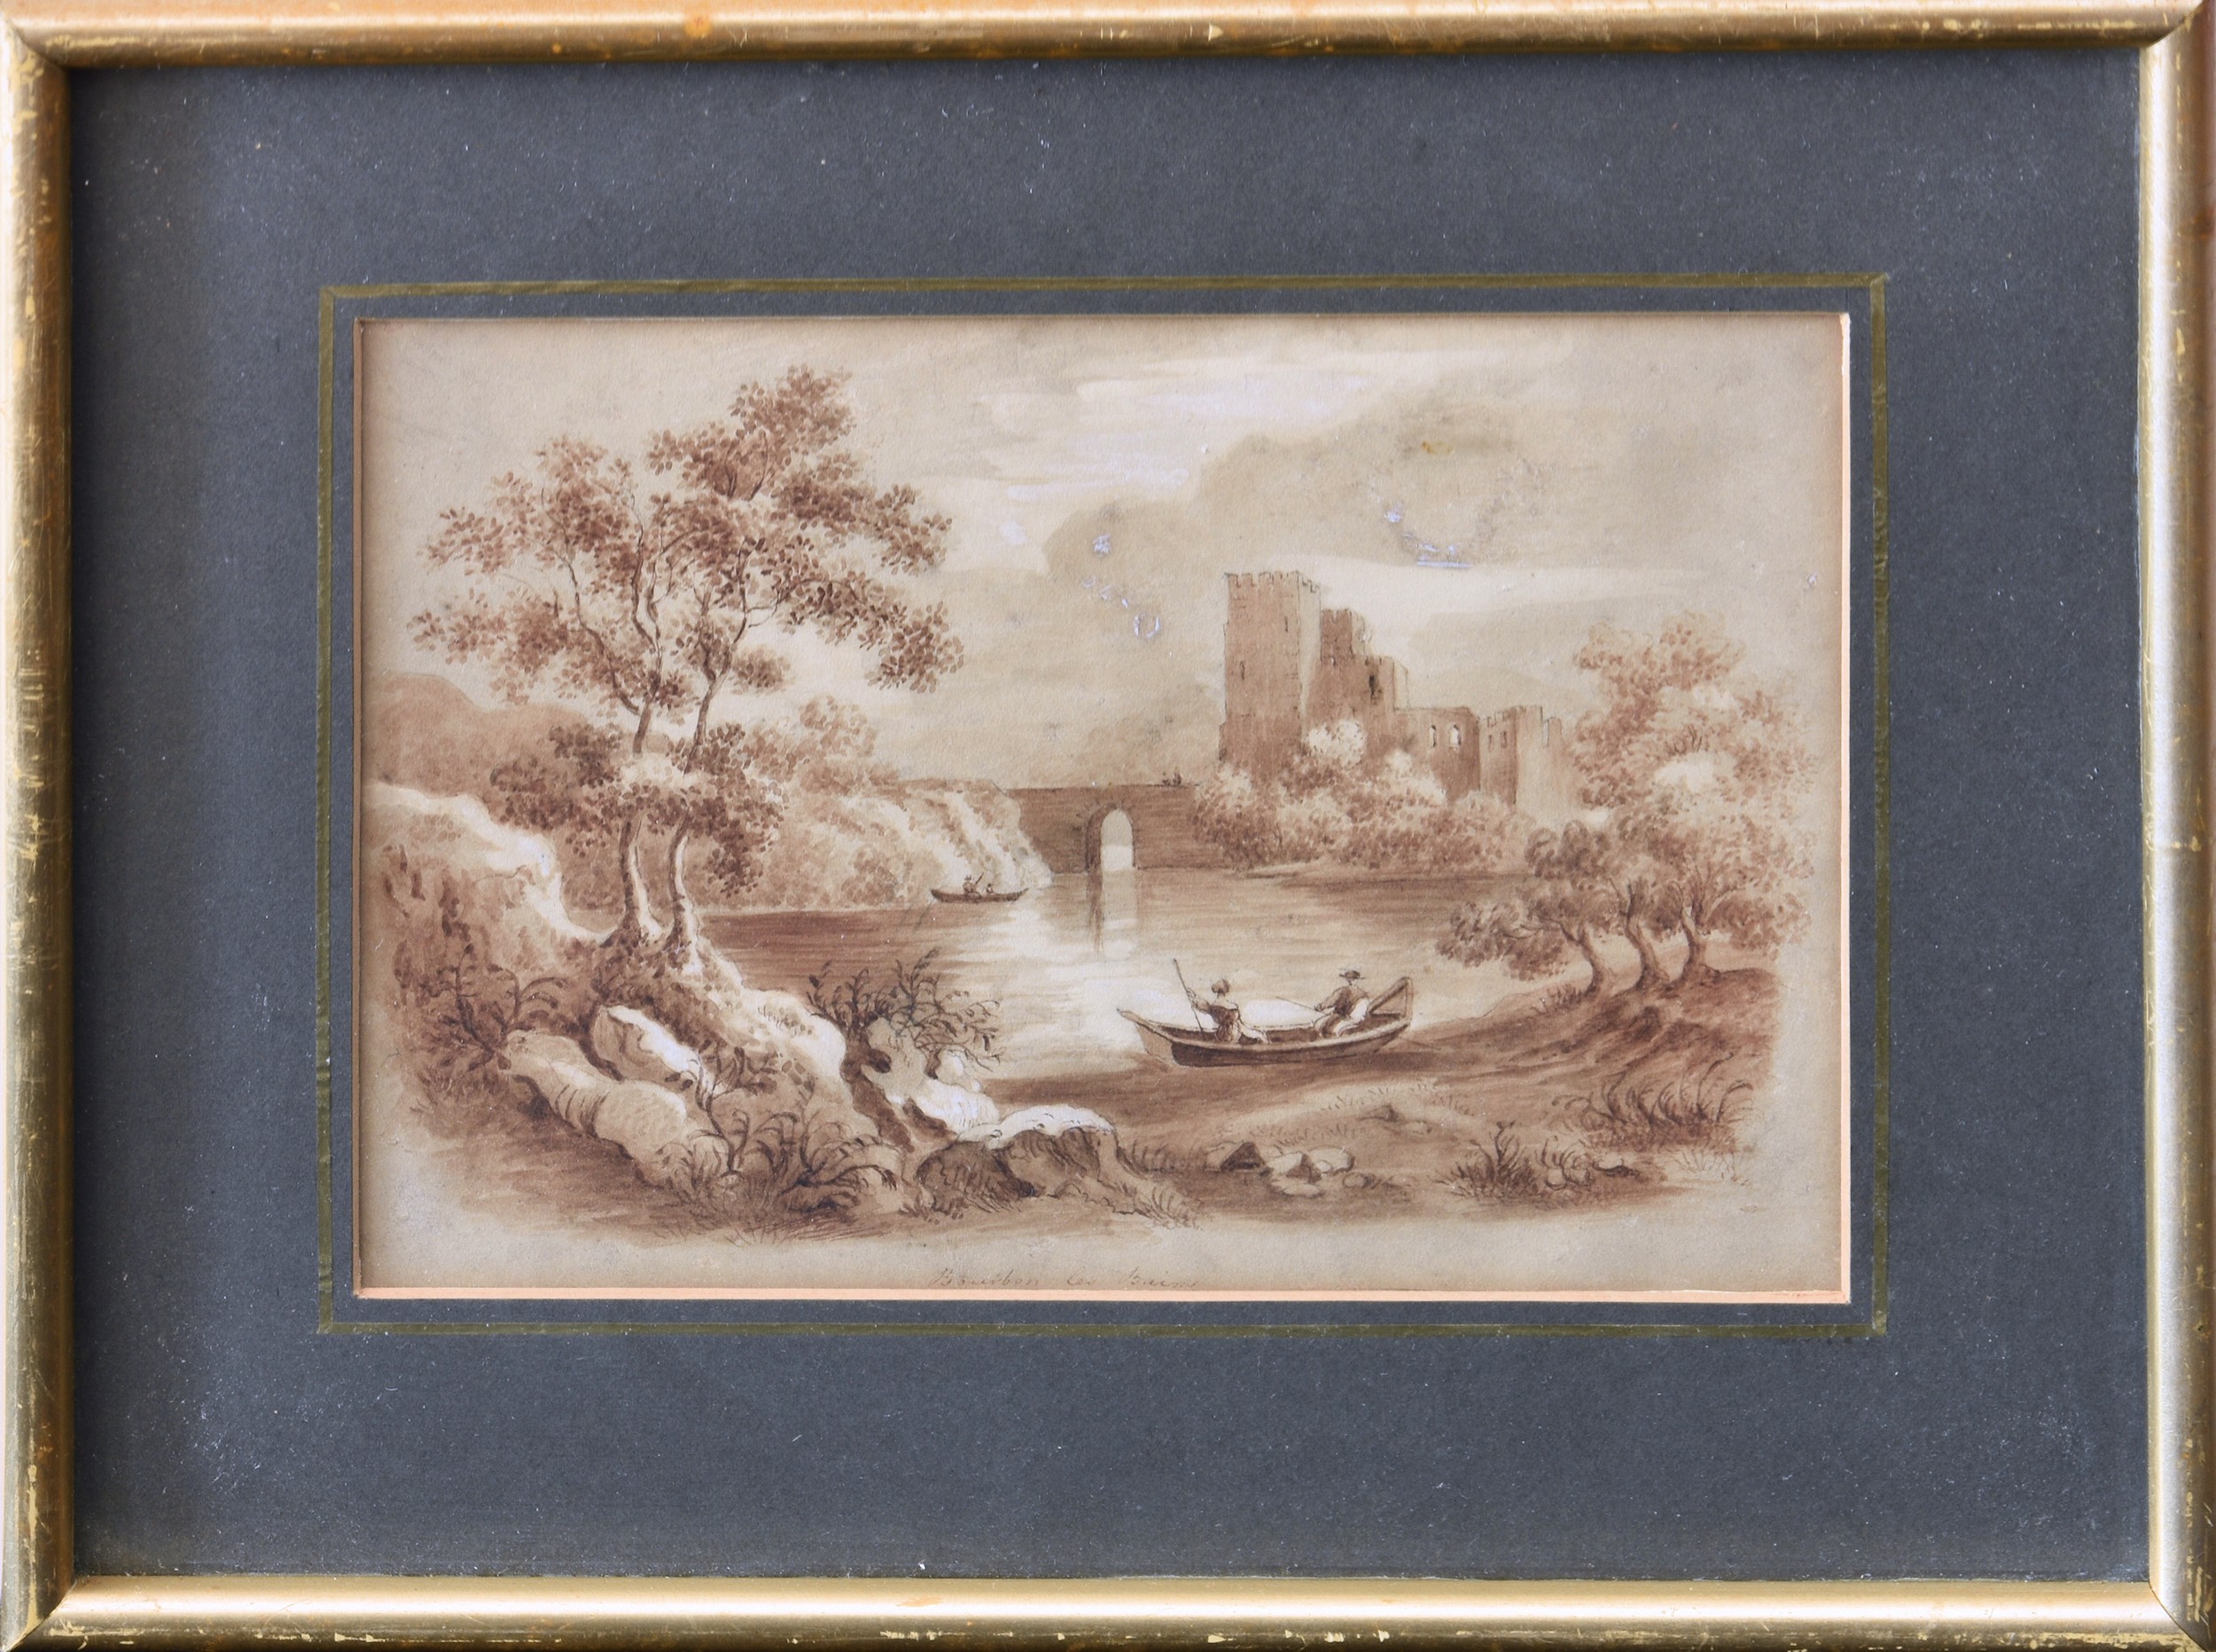 English School, early 19th century, Pair of River Landscapes, pen and ink and sepia watercolour, one - Image 2 of 4